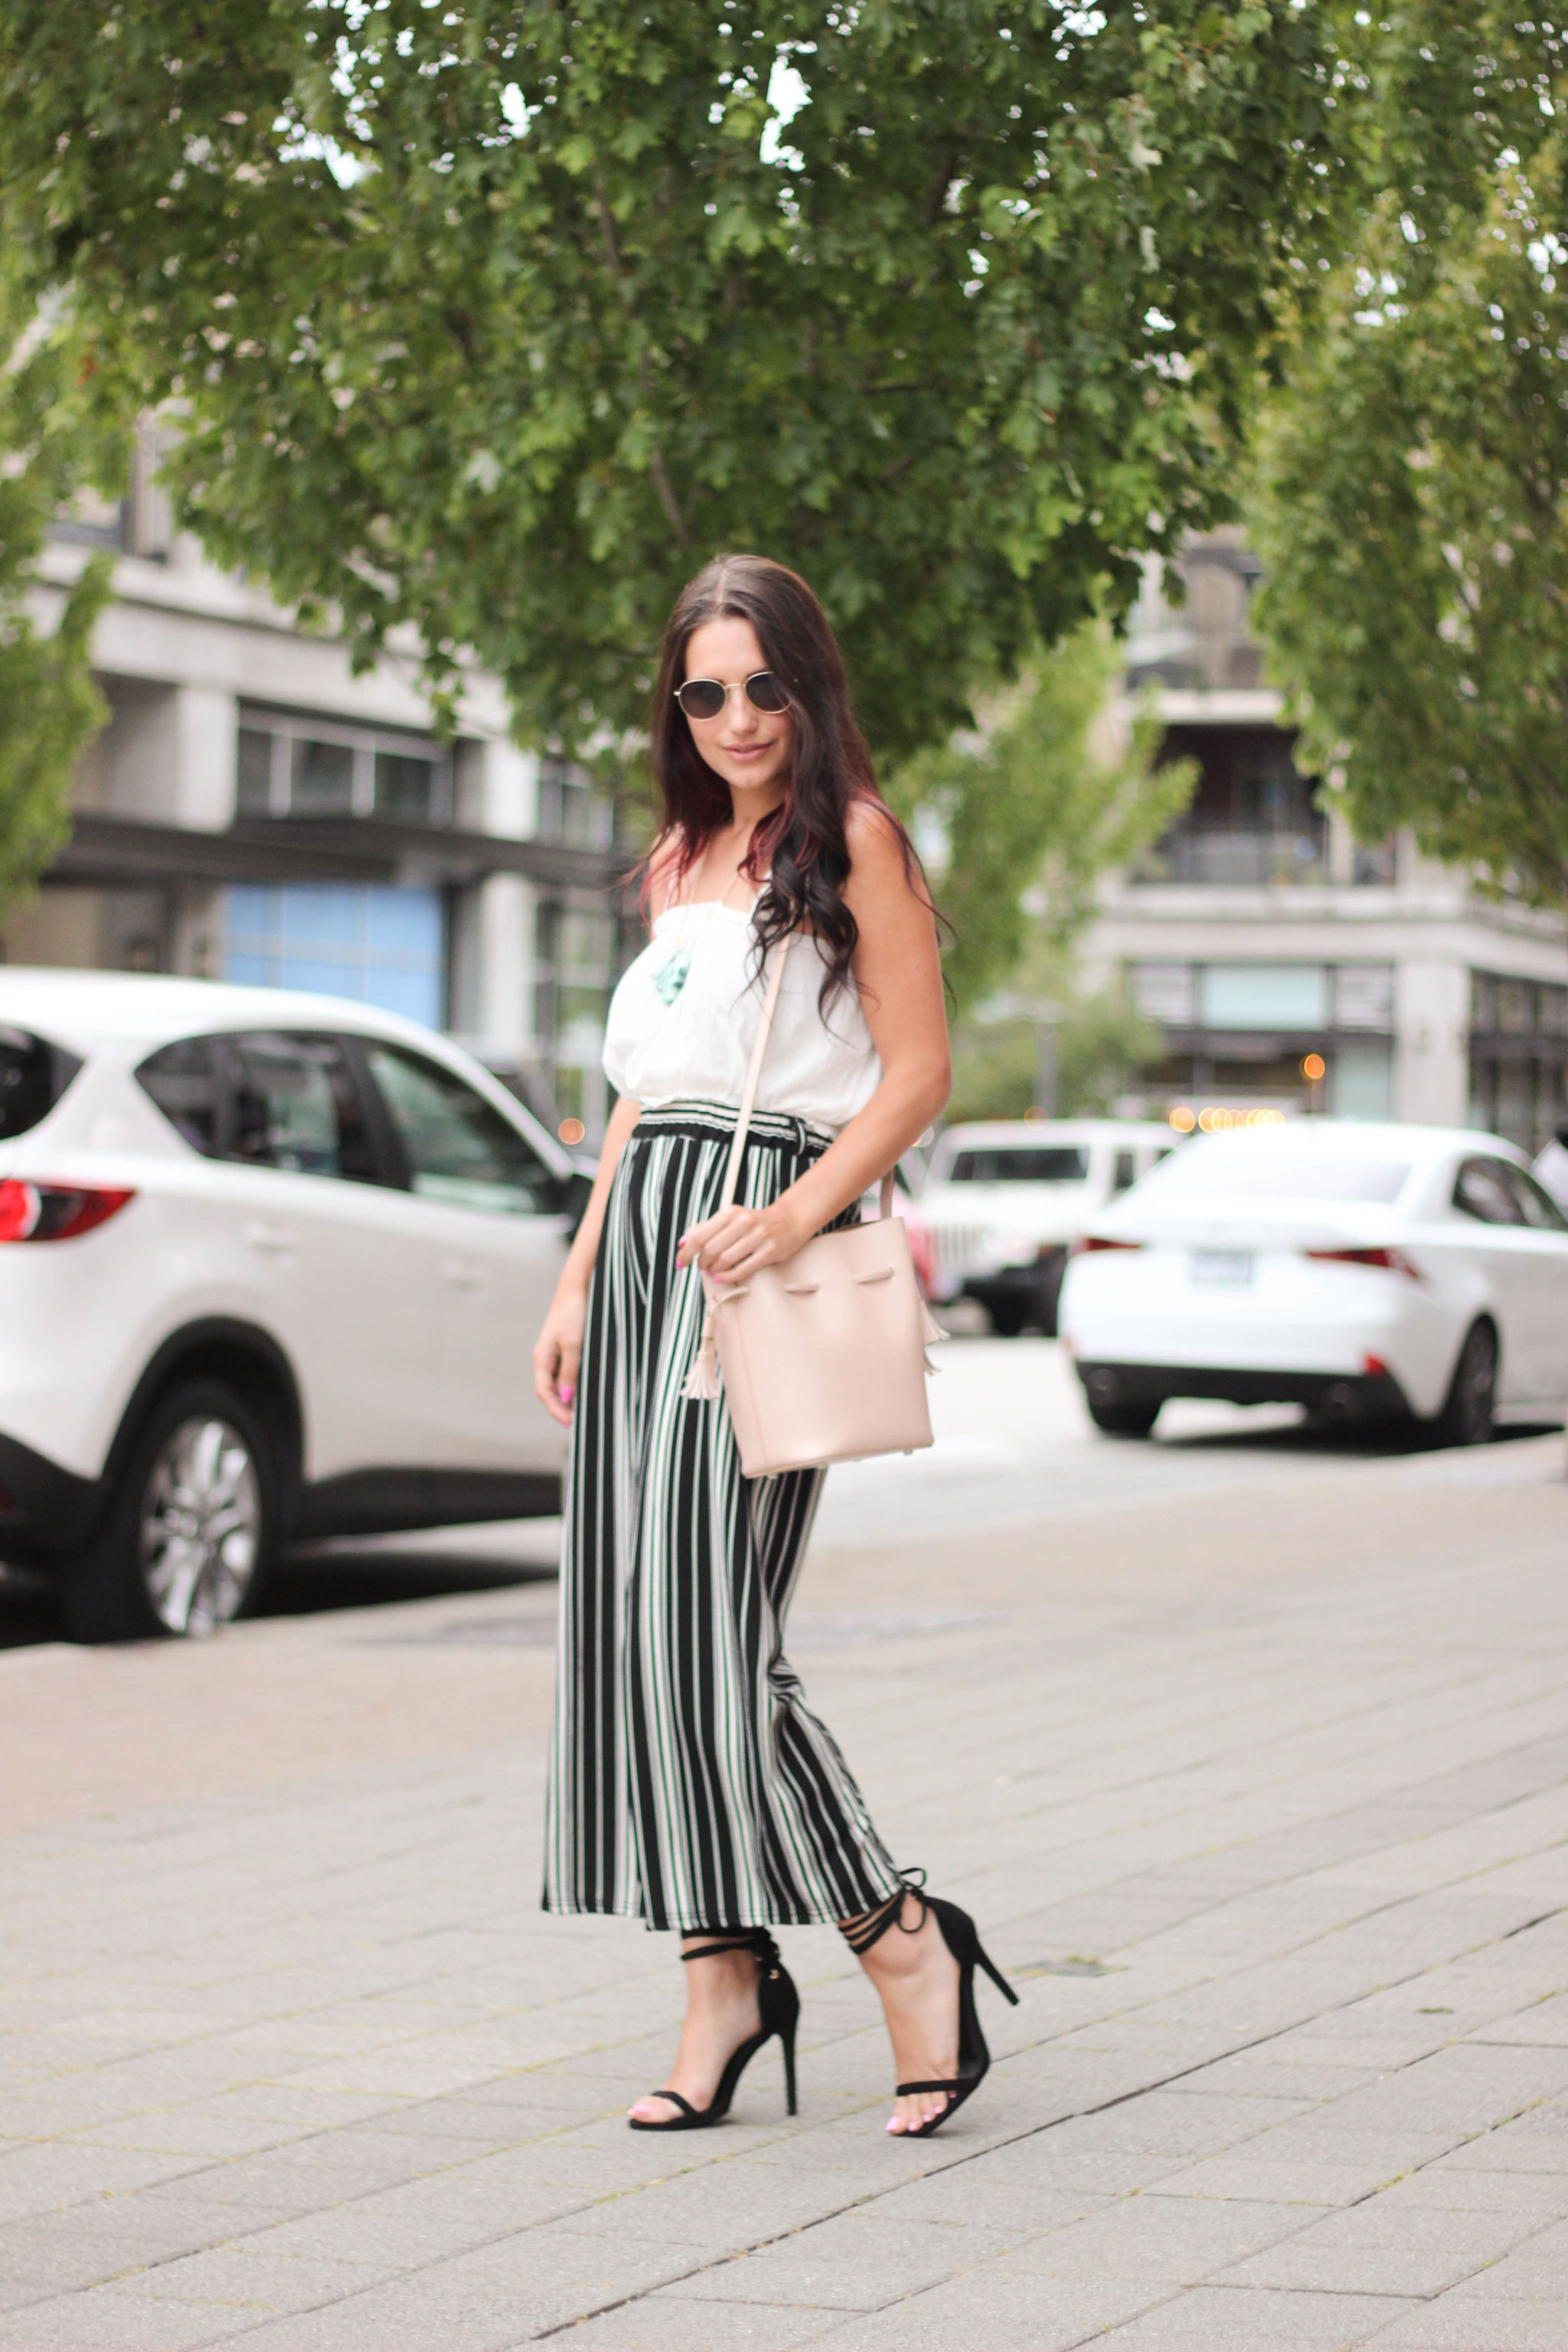 How to Wear Wide Leg Pants If You’re Short